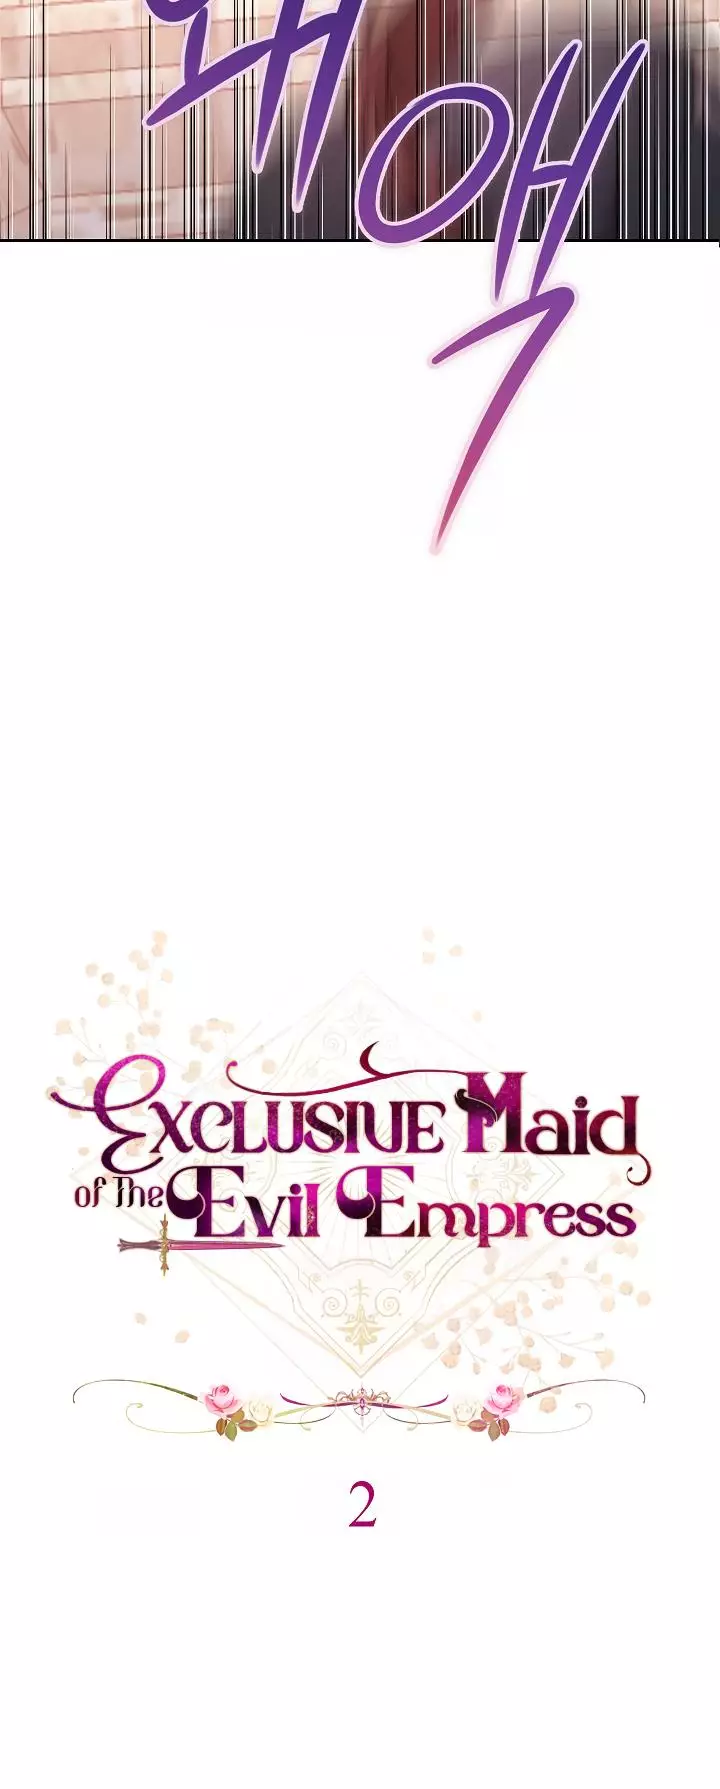 Exclusive Maid Of The Evil Empress - 2 page 19-6793937d